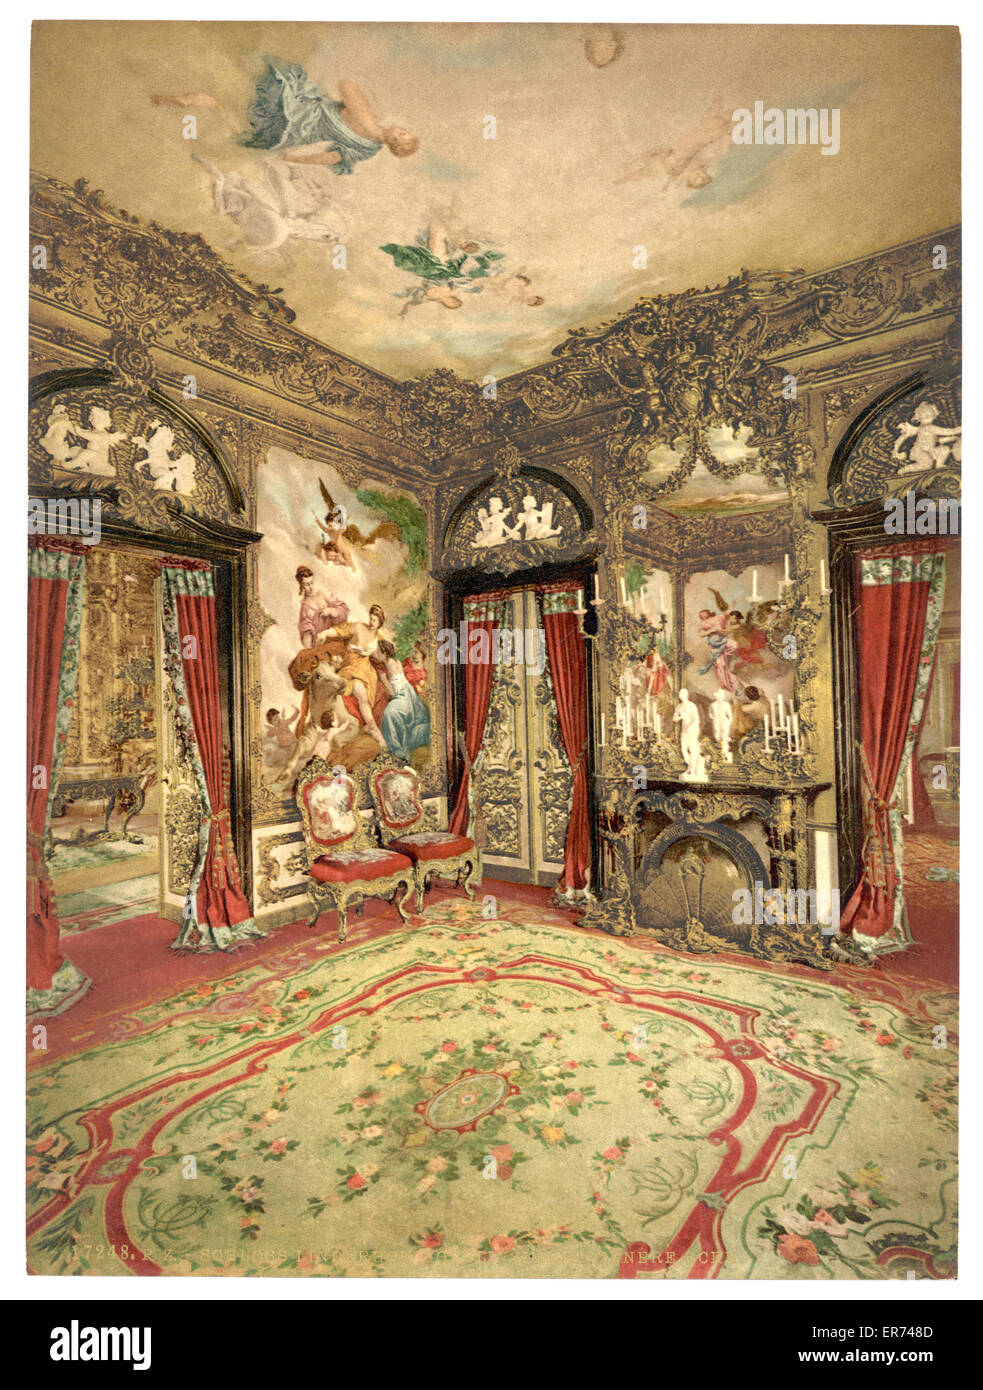 The Gobelin Tapestries, Linderhof Castle, Upper Bavaria, Germany. Date between ca. 1890 and ca. 1900. Stock Photo